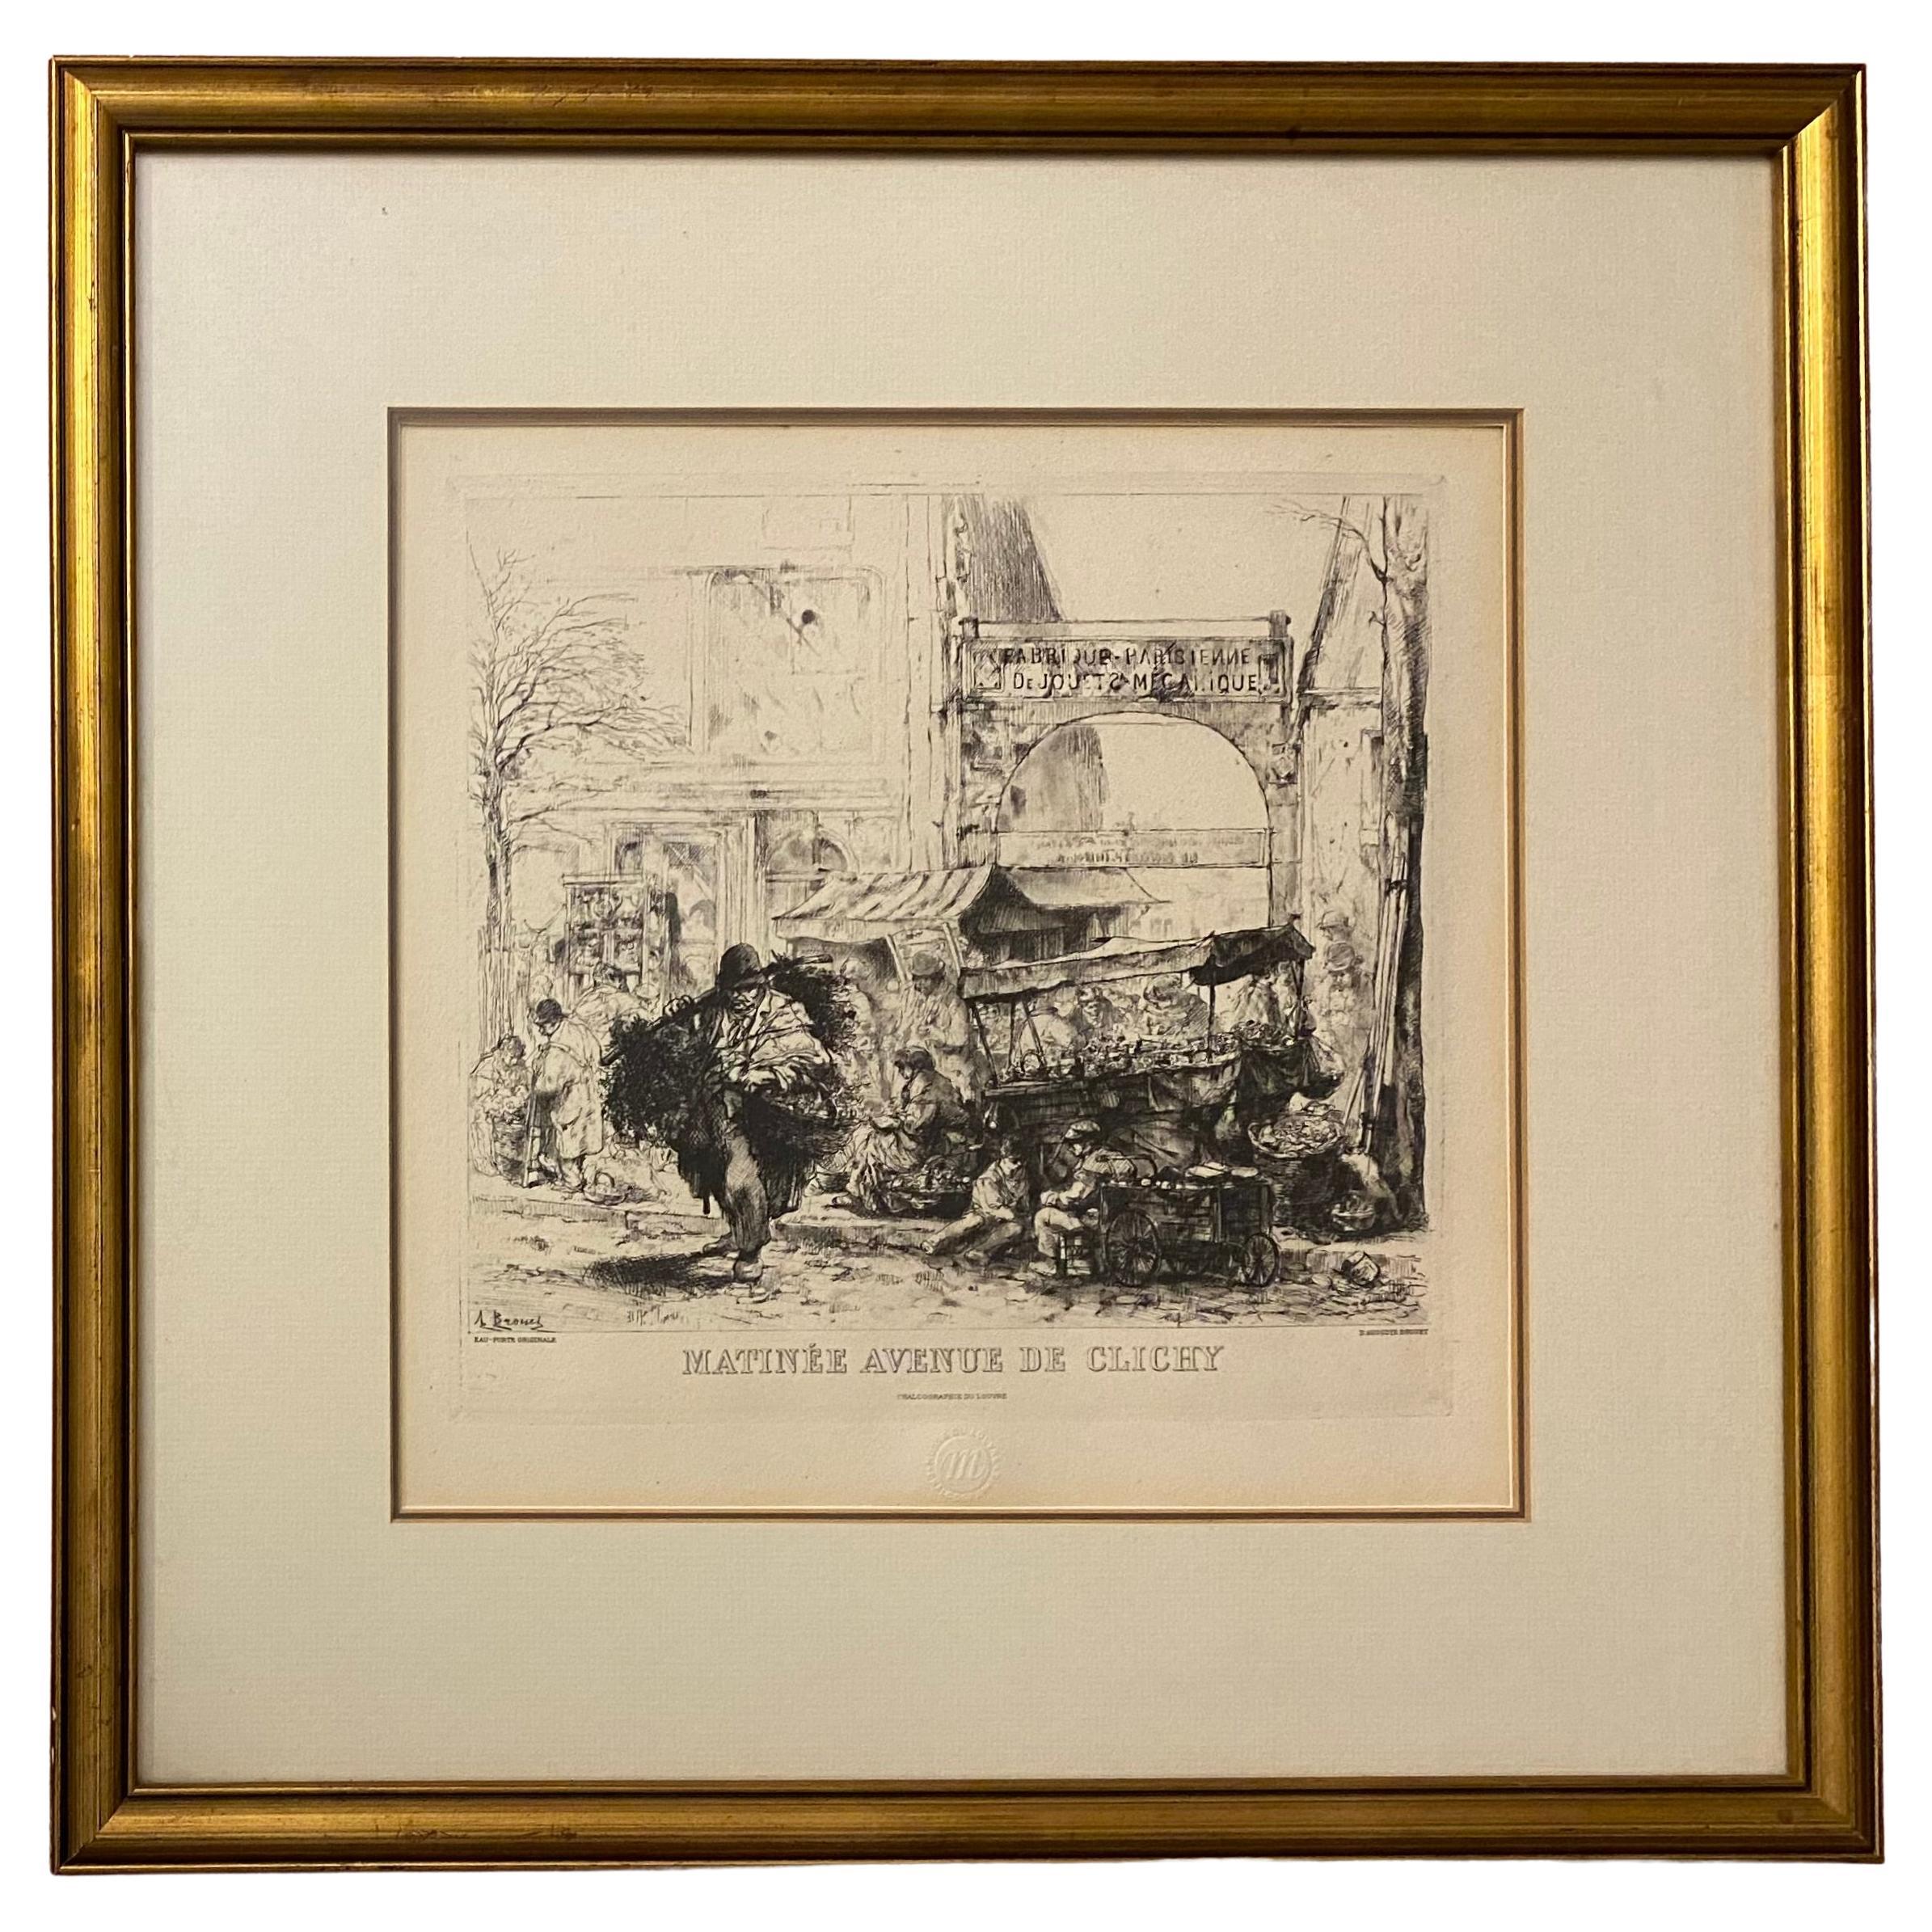 Chalcographie Engraving Issued By The Louvre "Matinee Avenue de Clichy" Framed